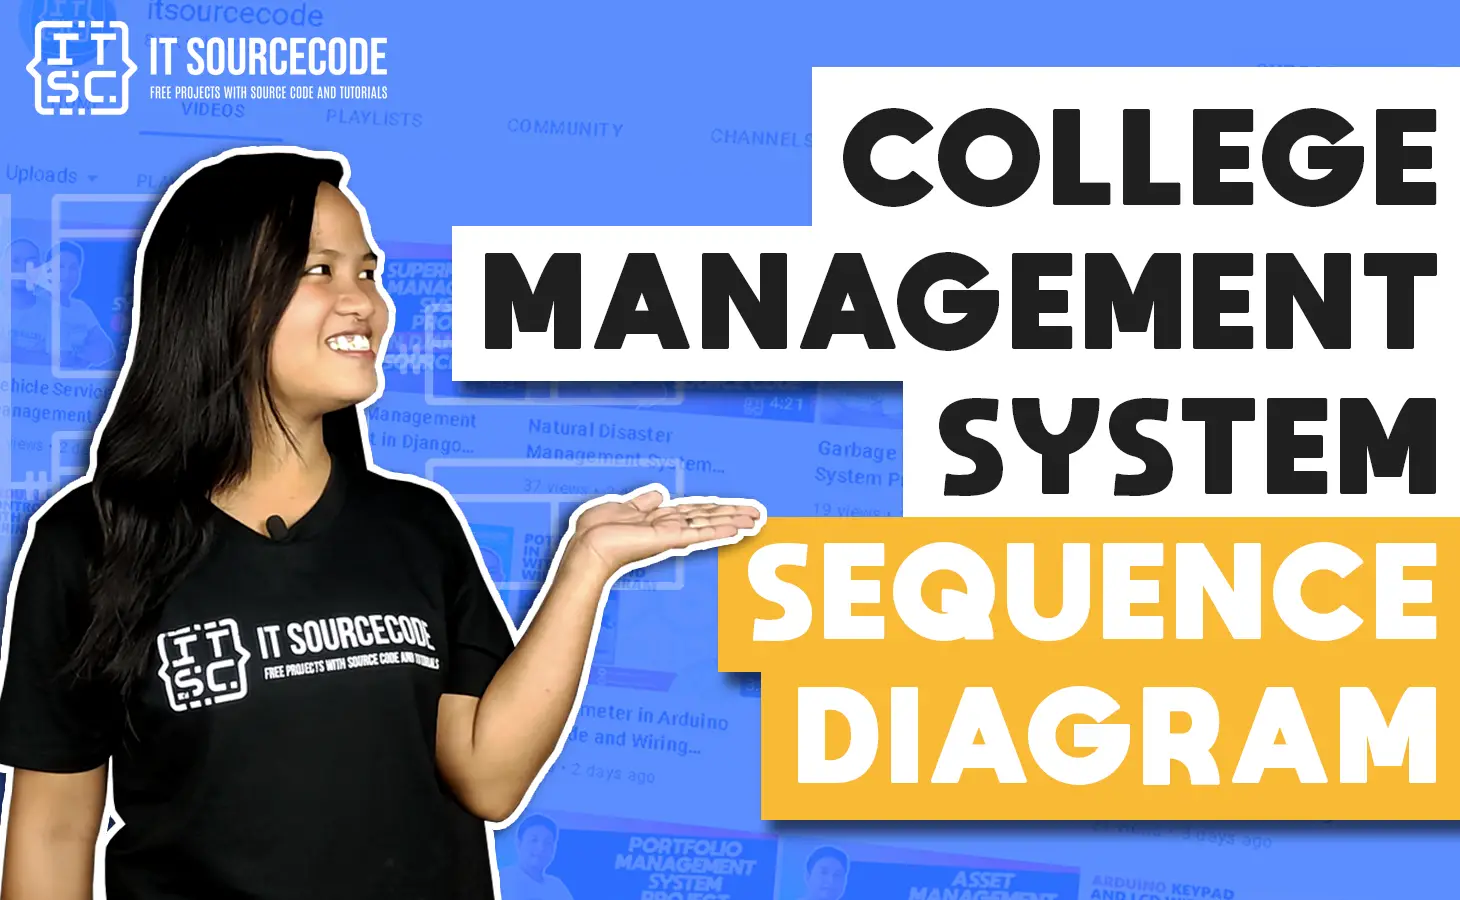 Sequence Diagram for College Management System